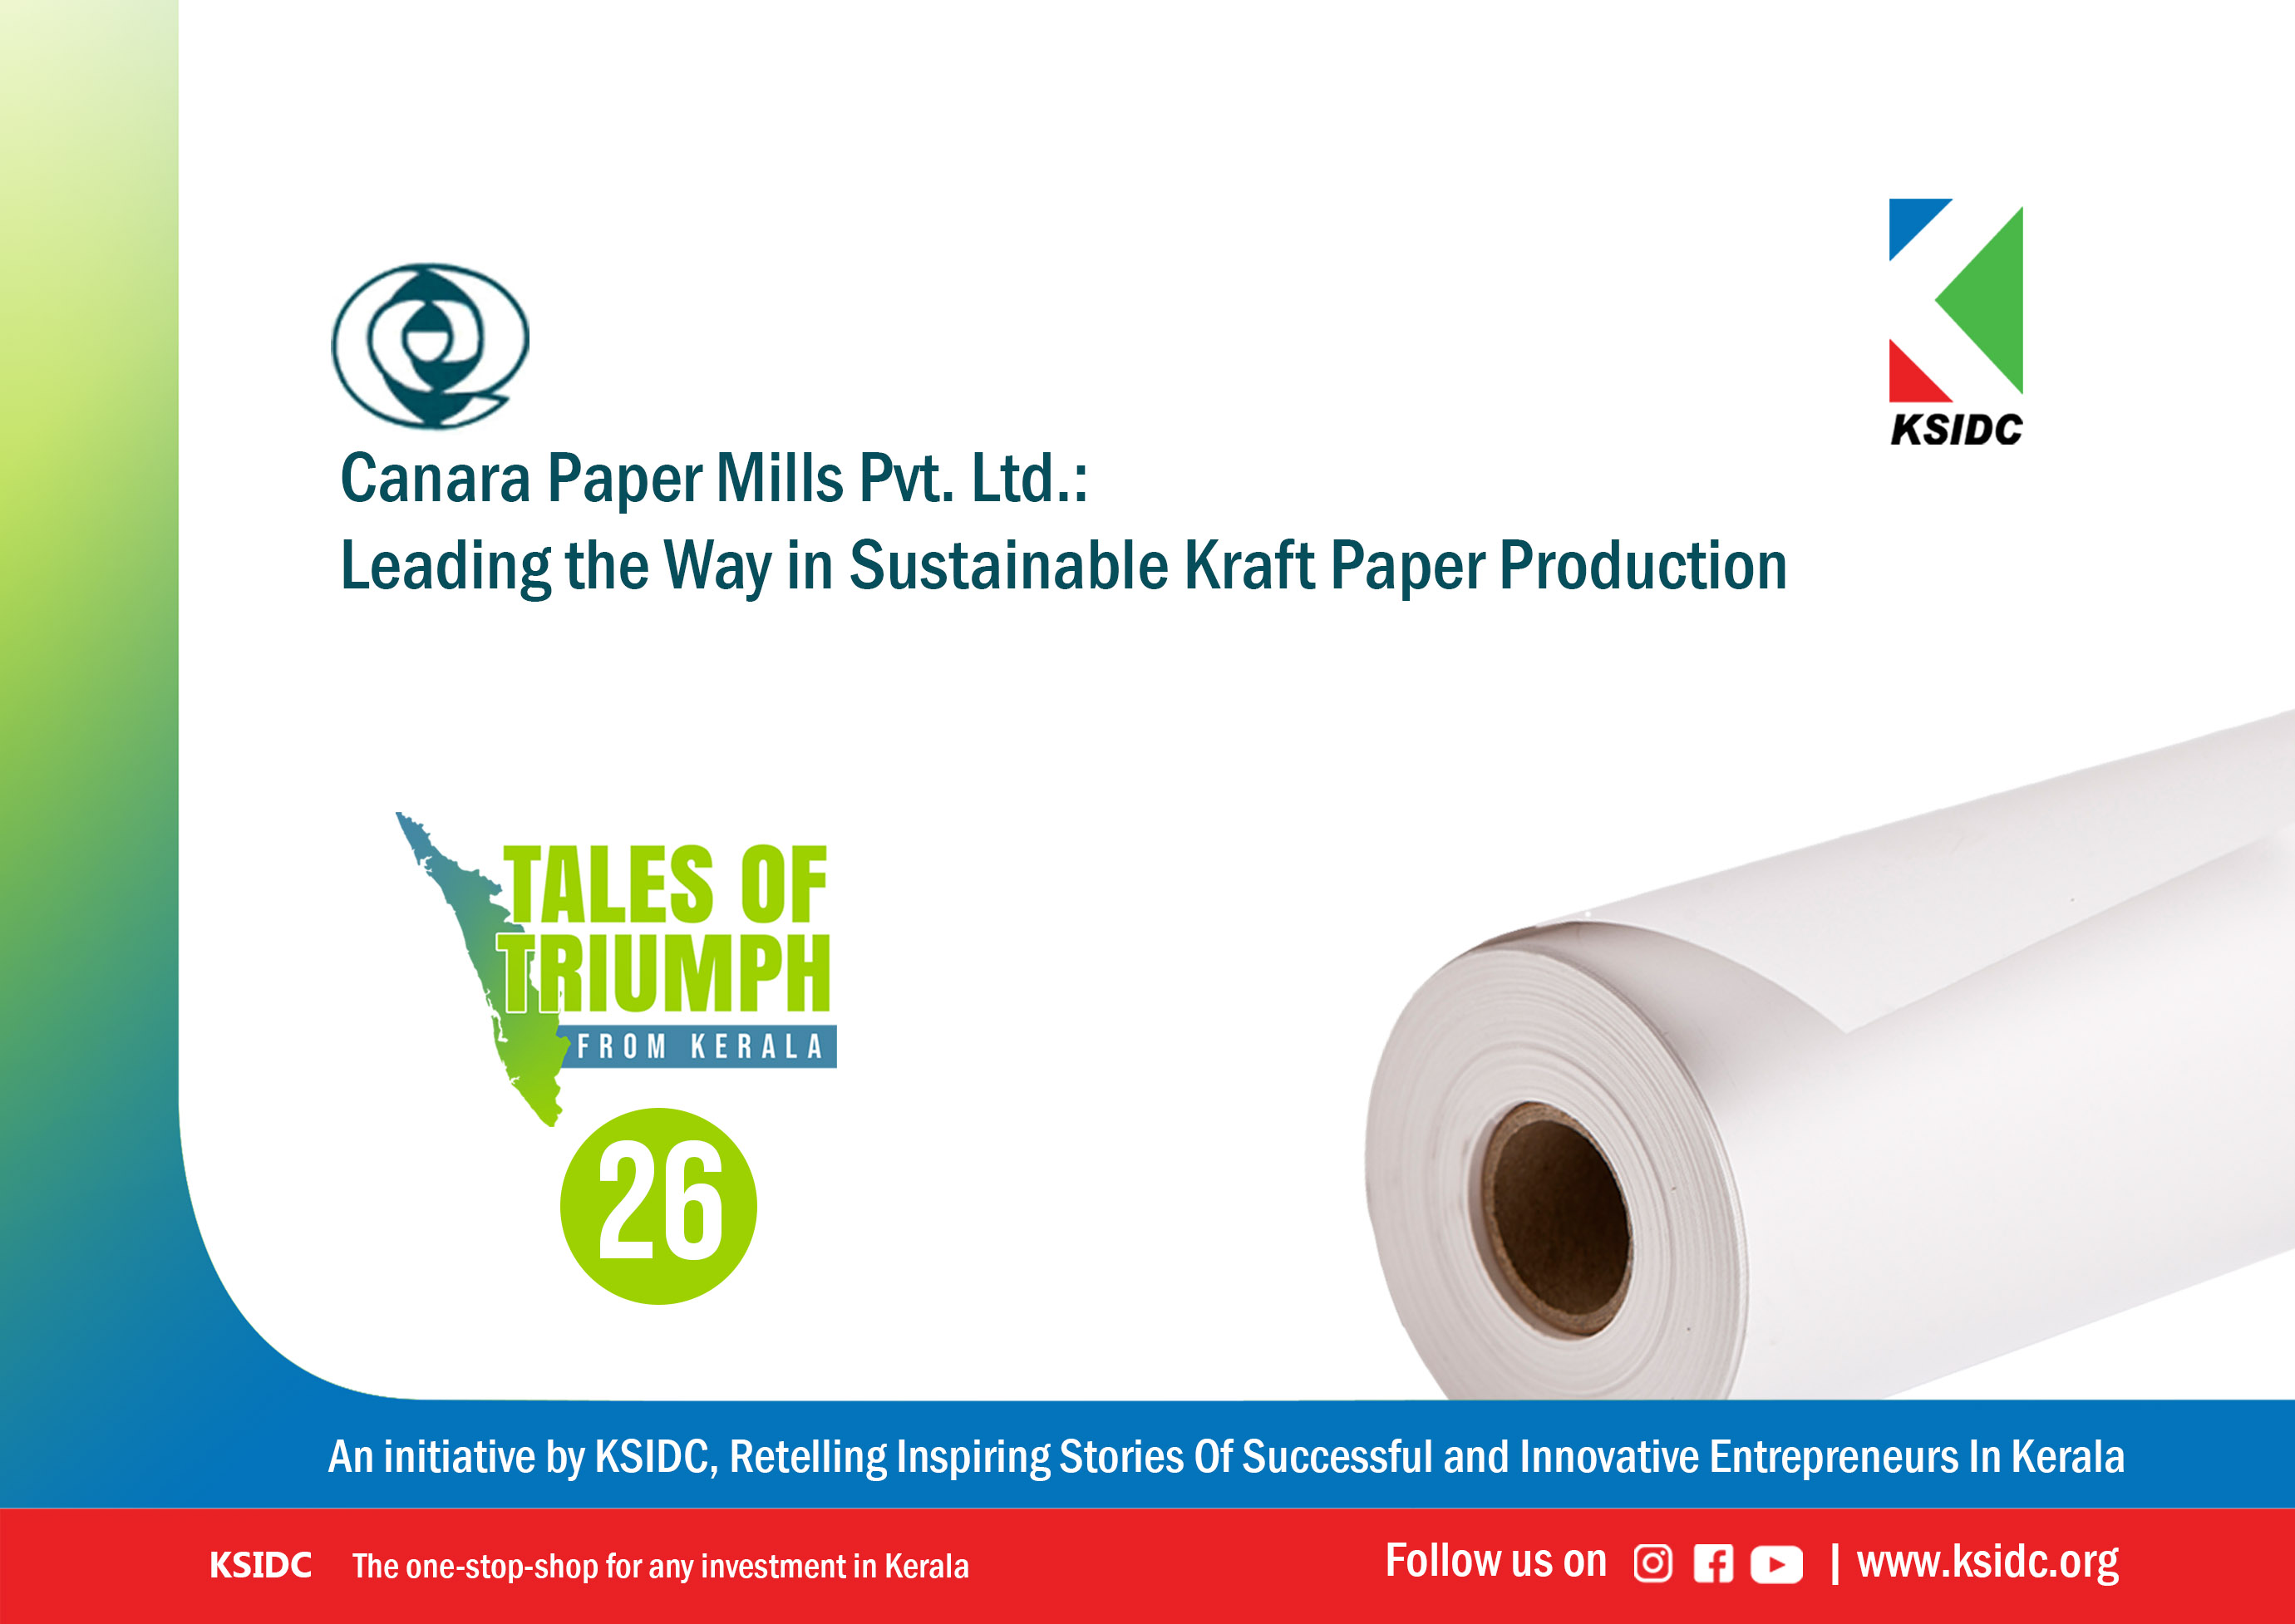 Kerala Paper Products Limited